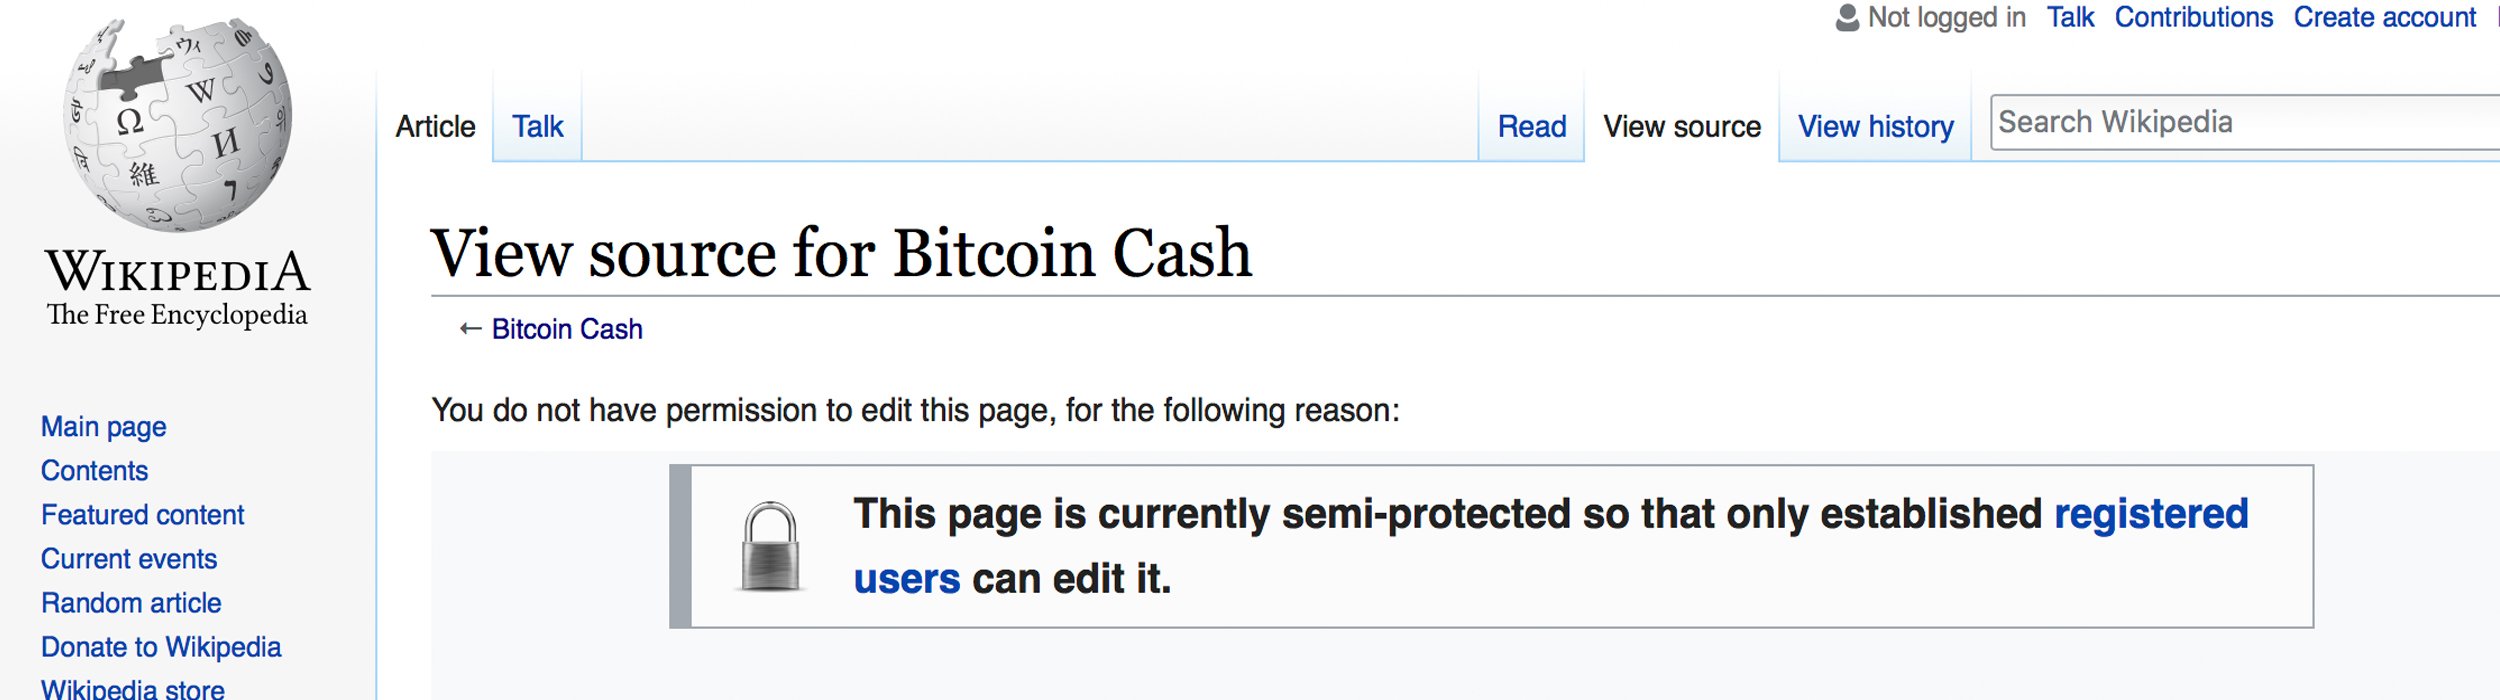 Bitcoin Cash Wiki Article Suffers From Edit Warring and Vandalism